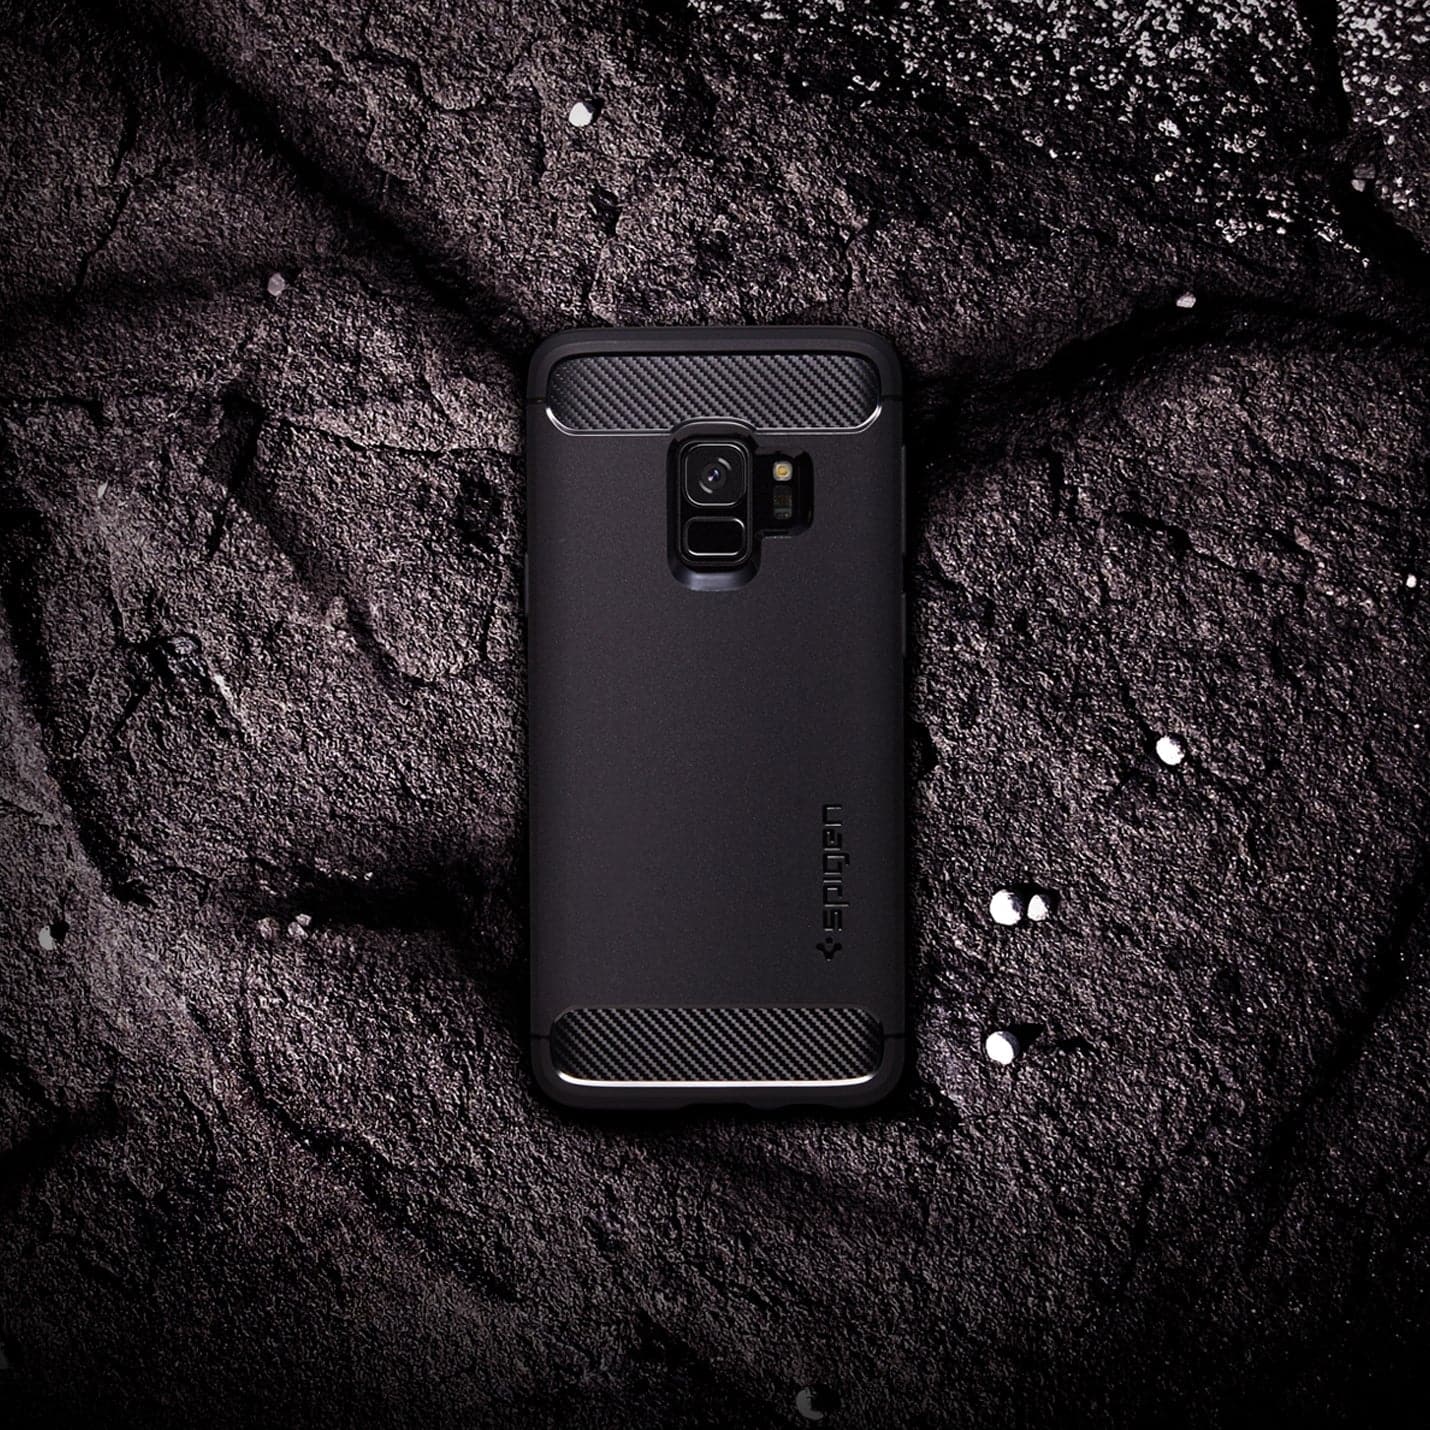 592CS22834 - Galaxy S9 Series Rugged Armor Case in black showing the back with device resting on a rock